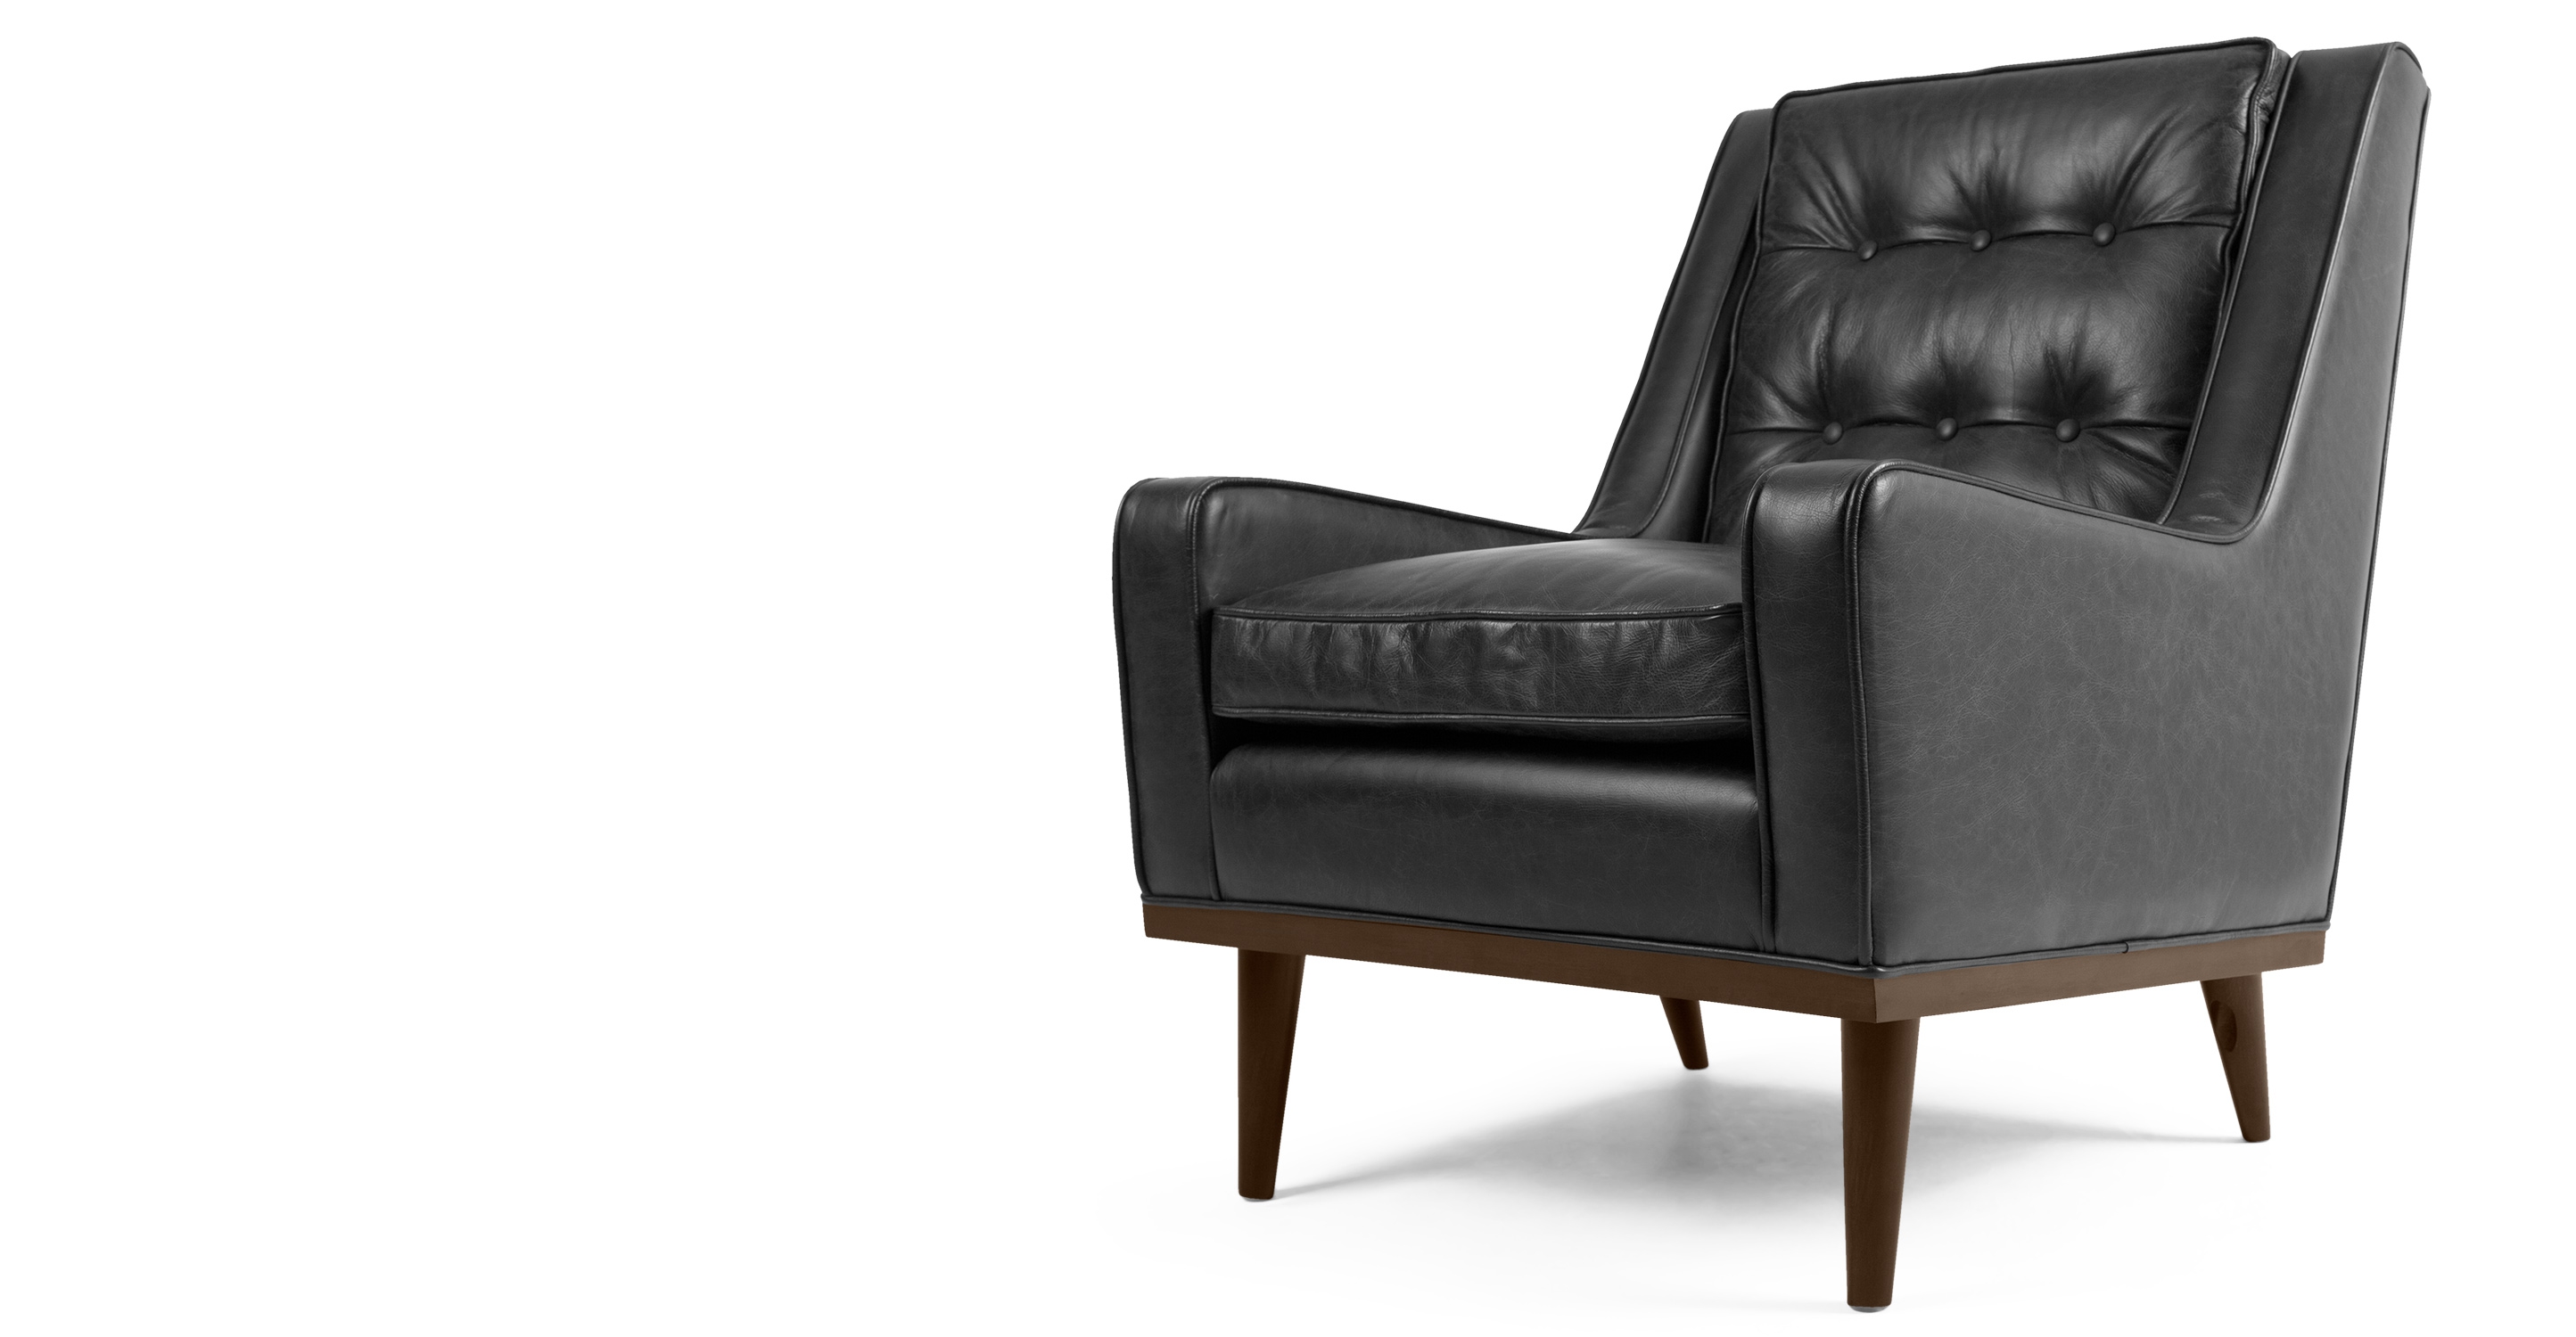 About black leather armchairs